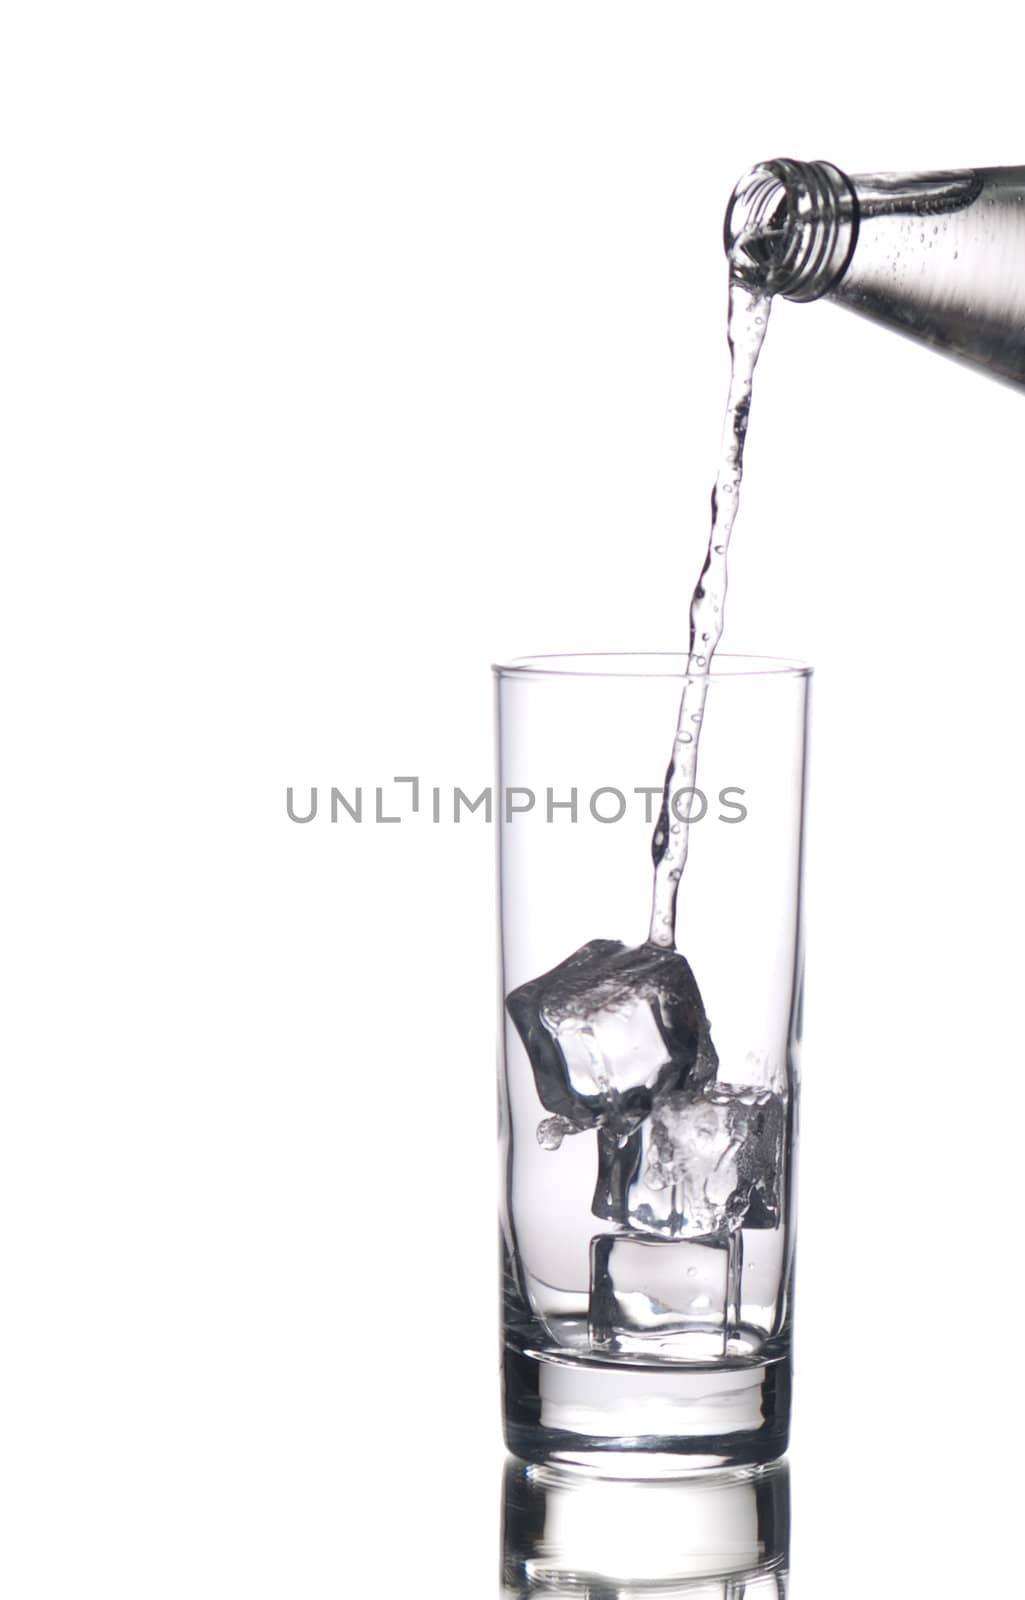 Sparkling water being poured in a glass